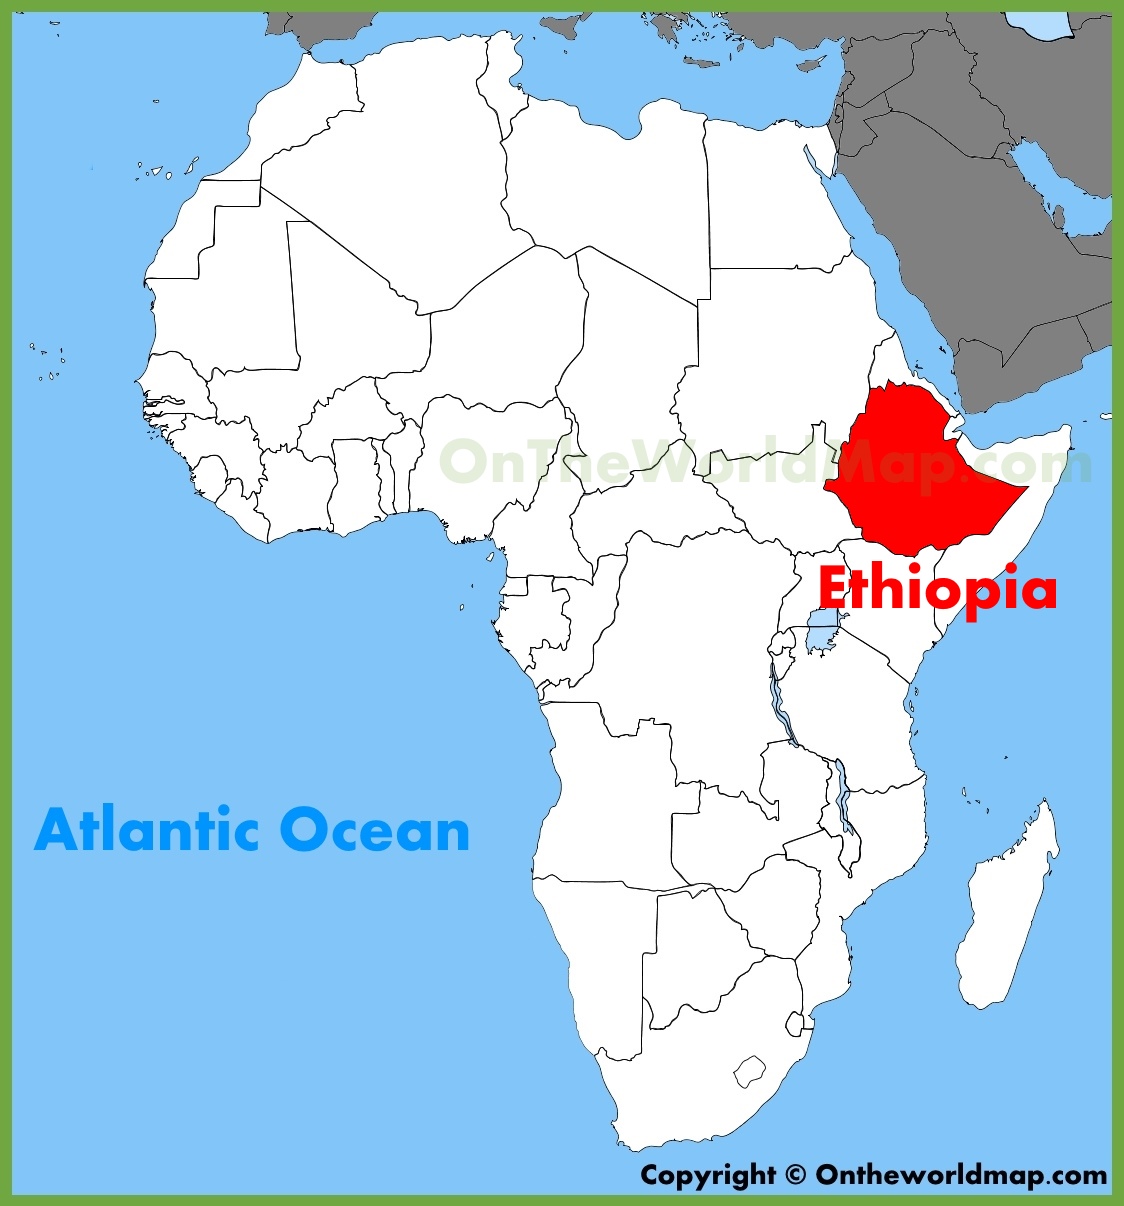 Ethiopia Location On The Africa Map